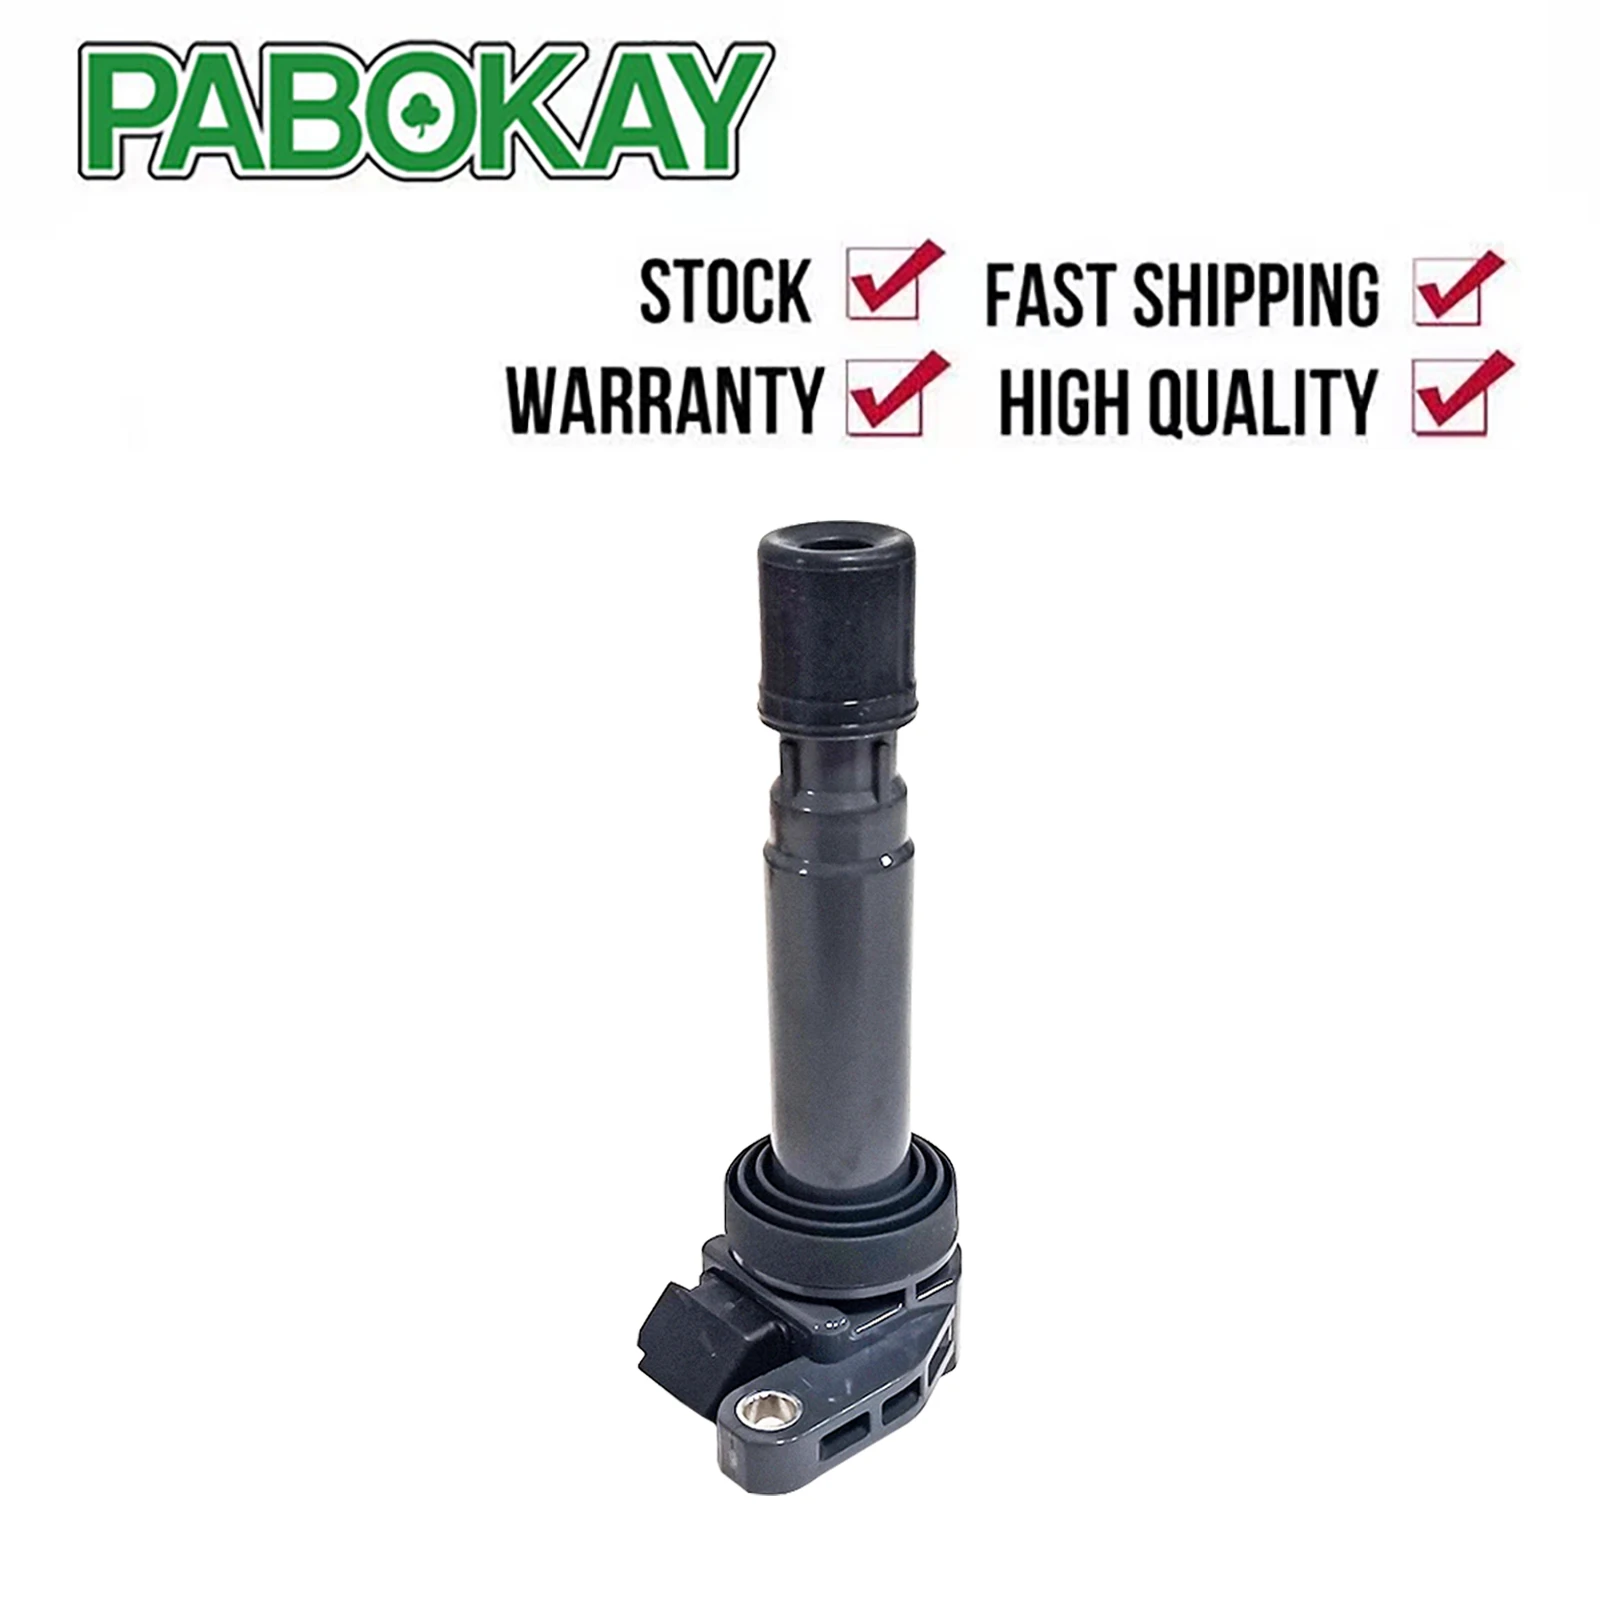 

NEW Ignition Coil For Daihatsu Cuore 4 Move Sirion 1.0i 4WD 099700-0570 997000570 90048-52126 9004852126 90048-52125 099700-0251